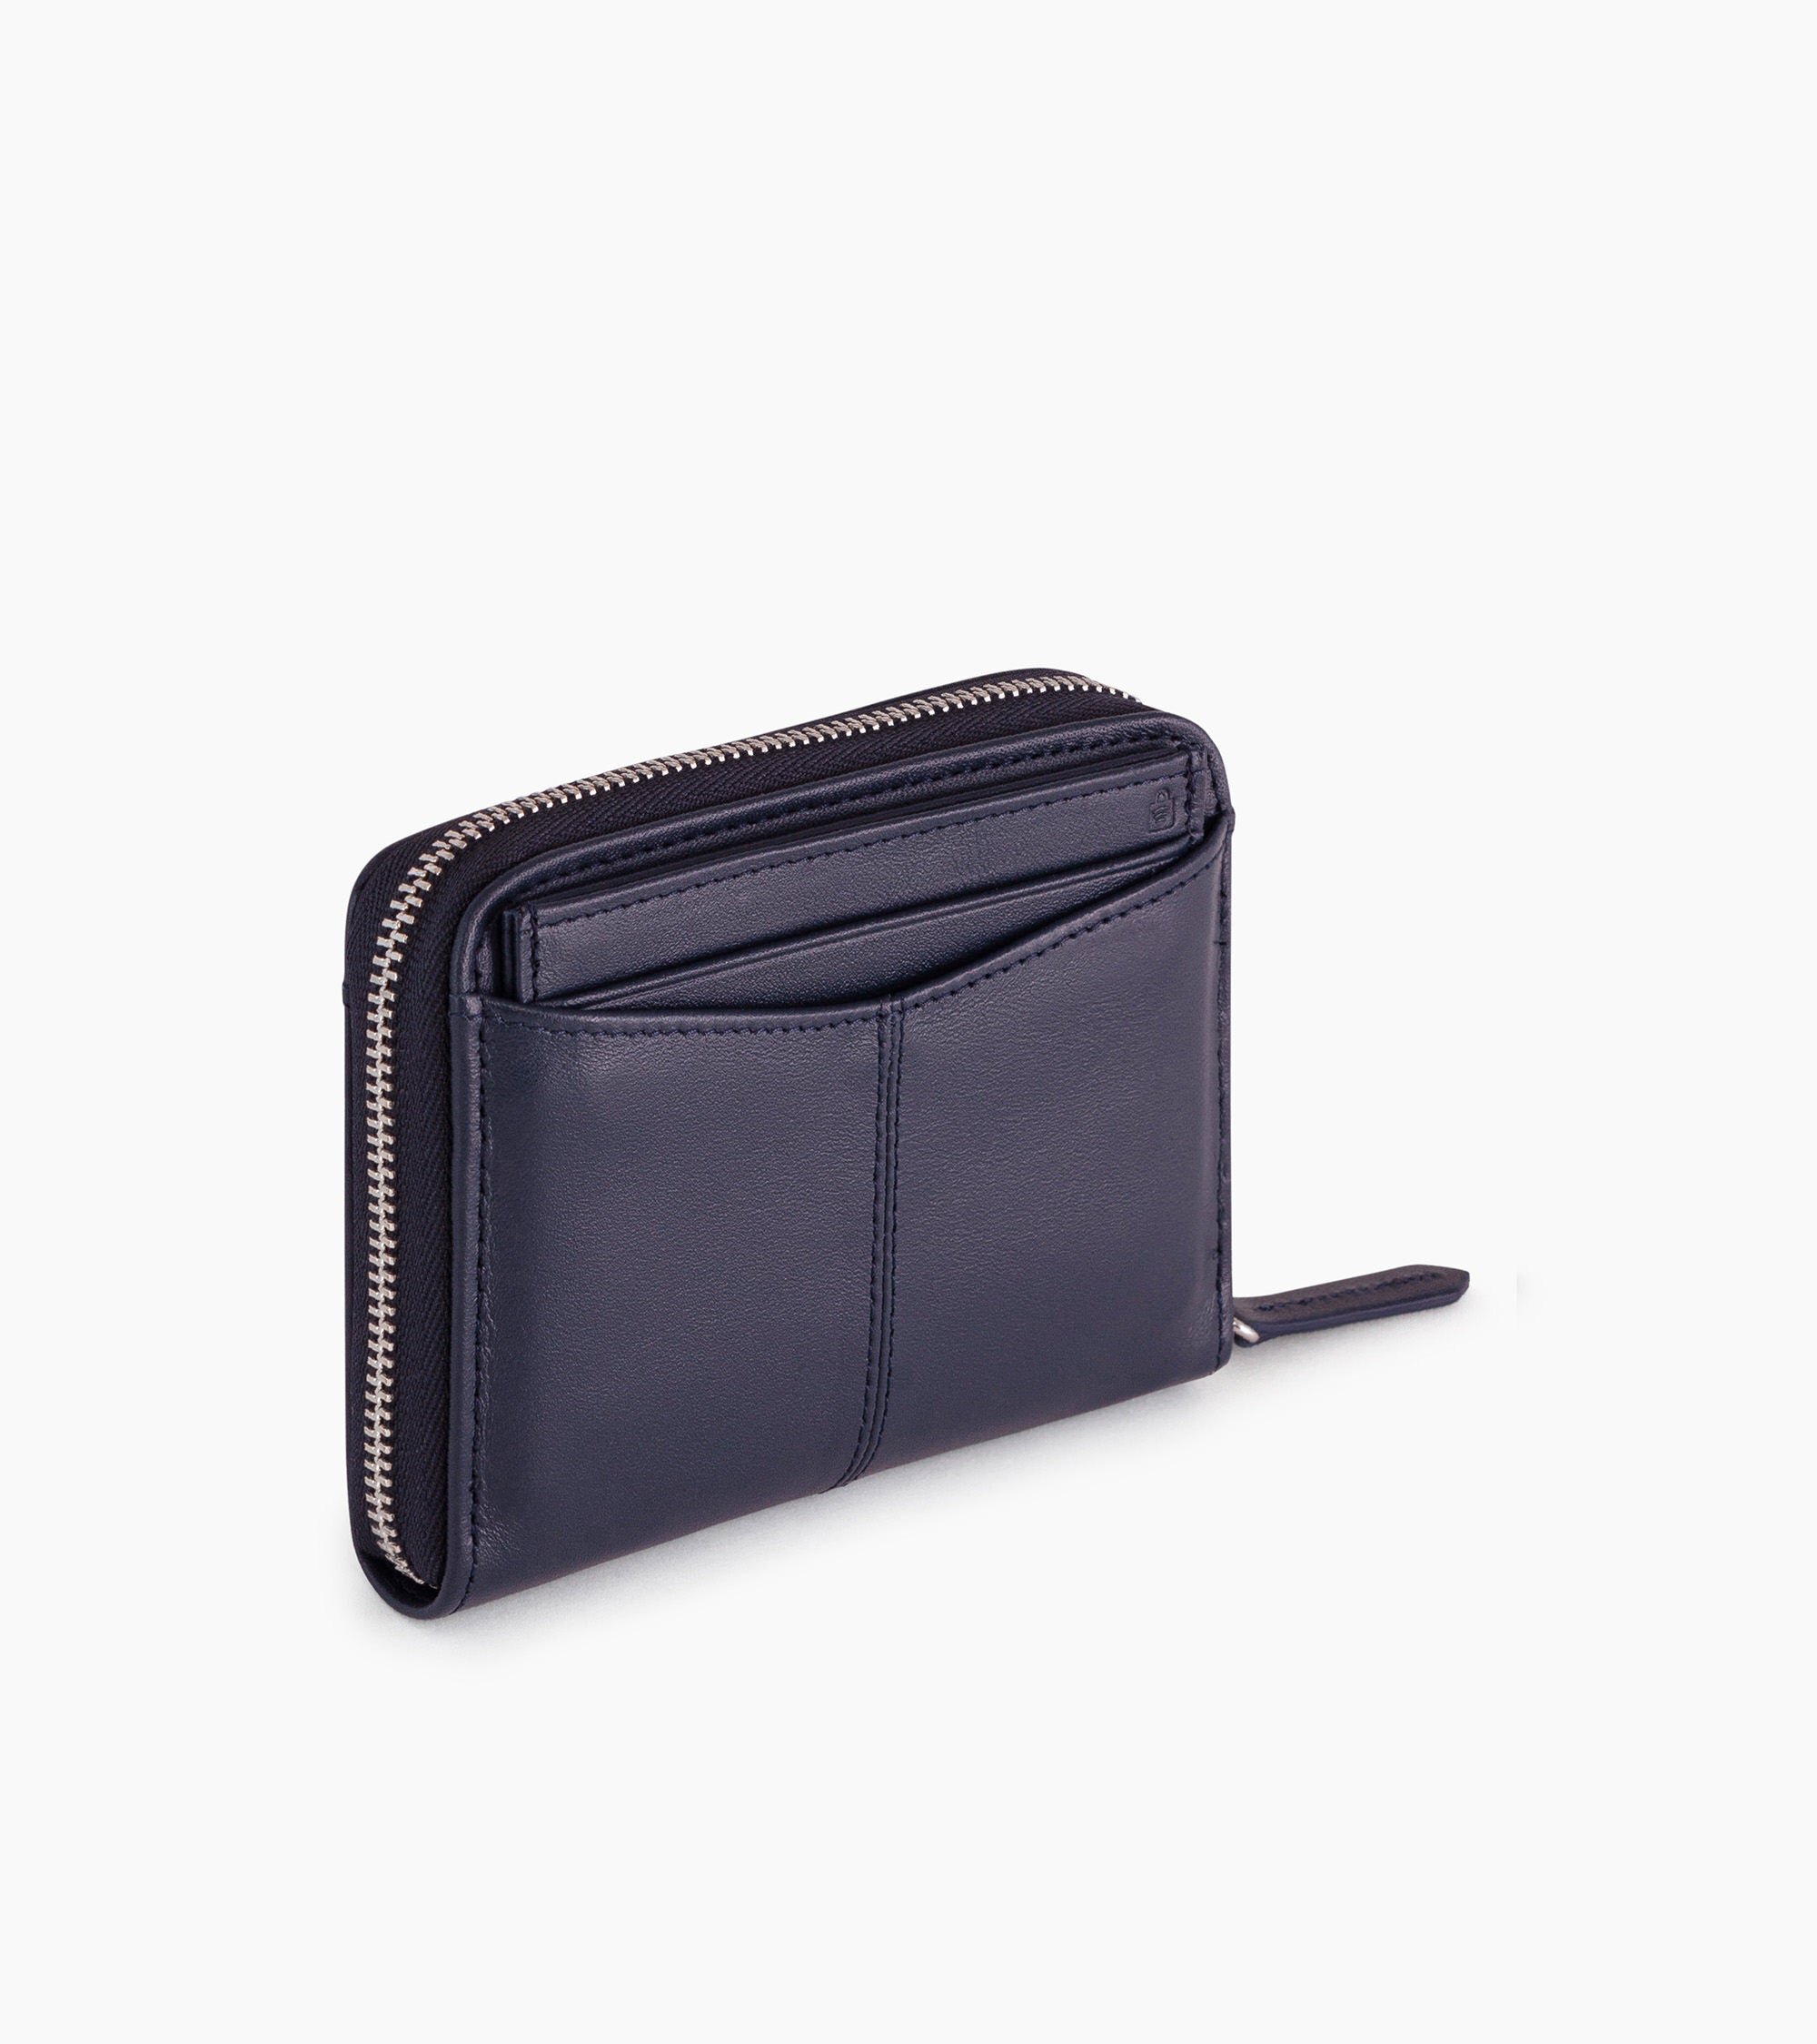 Zipped Charlotte smooth leather coin purse and removable cardholder